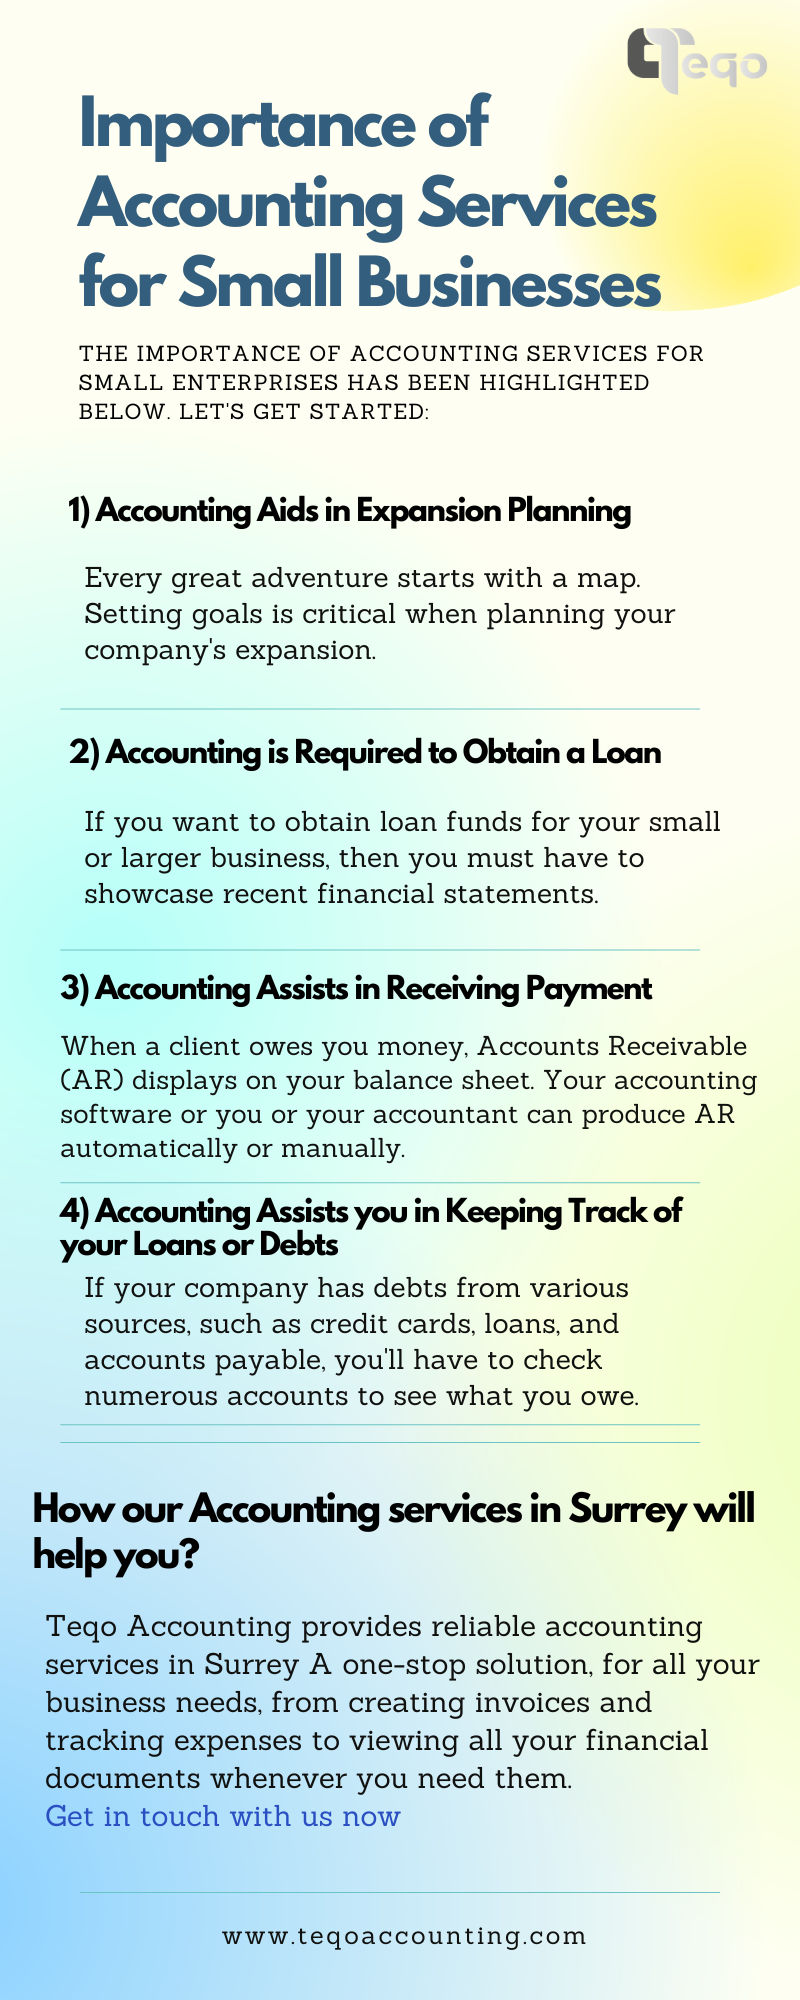 t
Importance of

Accounting Services
for Small Businesses

THE IMPORTANCE OF ACCOUNTING SERVICES FOR
SMALL ENTERPRISES HAS BEEN HIGHLIGHTED
BELOW LETS GET STARTED

1) Accounting Aids in Expansion Planning

Every great adventure starts with a map
Setting goals is critical when planning your
company’s expansion

2) Accounting is Required to Obtain a Loan

If you want to obtain loan funds for your small
or larger business, then you must have to
showcase recent financial statements

3) Accounting Assists in Receiving Payment

When a client owes you money. Accounts Receivable
(AR) displays on your balance sheet. Your accounting
software or you or your accountant can produce AR
automatically or manually

4) Accounting Assists you in Keeping Track of
your Loans or Debts
If your company has debts from various
sources. such as credit cards, loans. and
accounts payable, you'll have to check
numerous accounts to see what you owe

How our Accounting services in Surrey will
help you?

Teqo Accounting provides reliable accounting
services in Surrey A one-stop solution. for all your
business needs, from creating invoices and
tracking expenses to viewing all your financial
documents whenever you need them.

Get in touch with us now

www teqoaccounting com